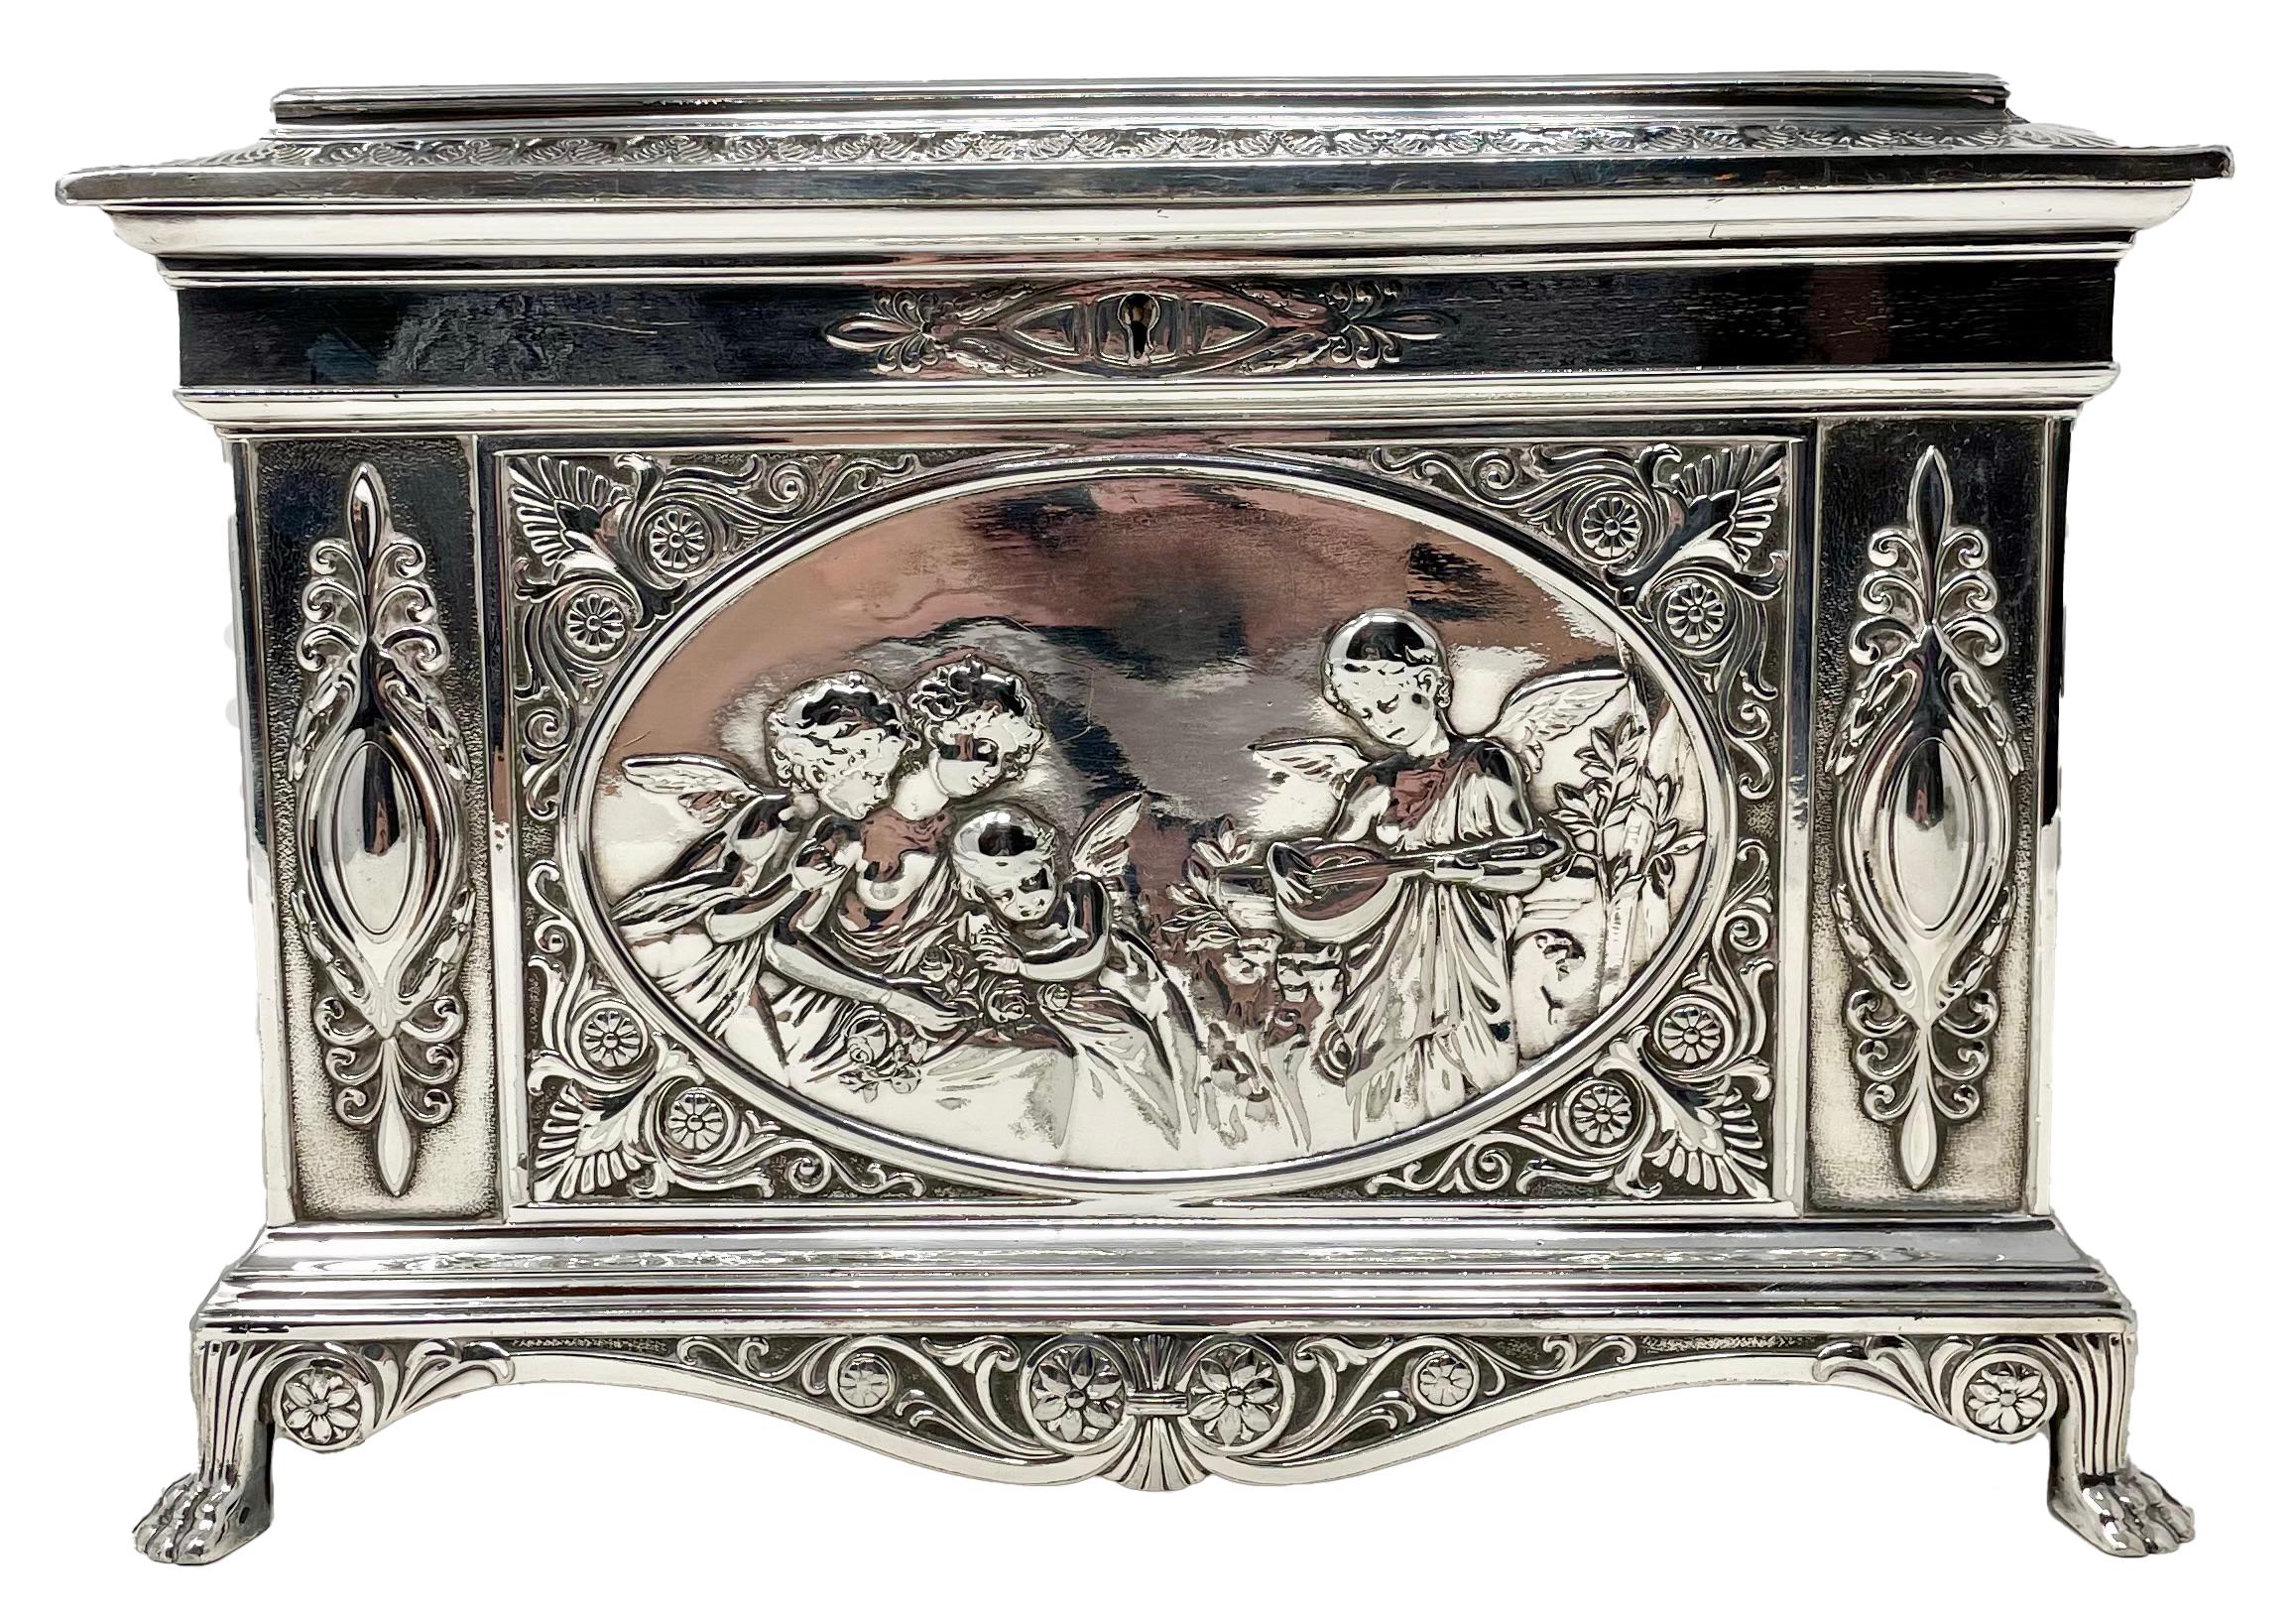 Antique English Sheffield Silver-Plated Footed Jewel Box, Circa 1890.
Beautiful Chasing